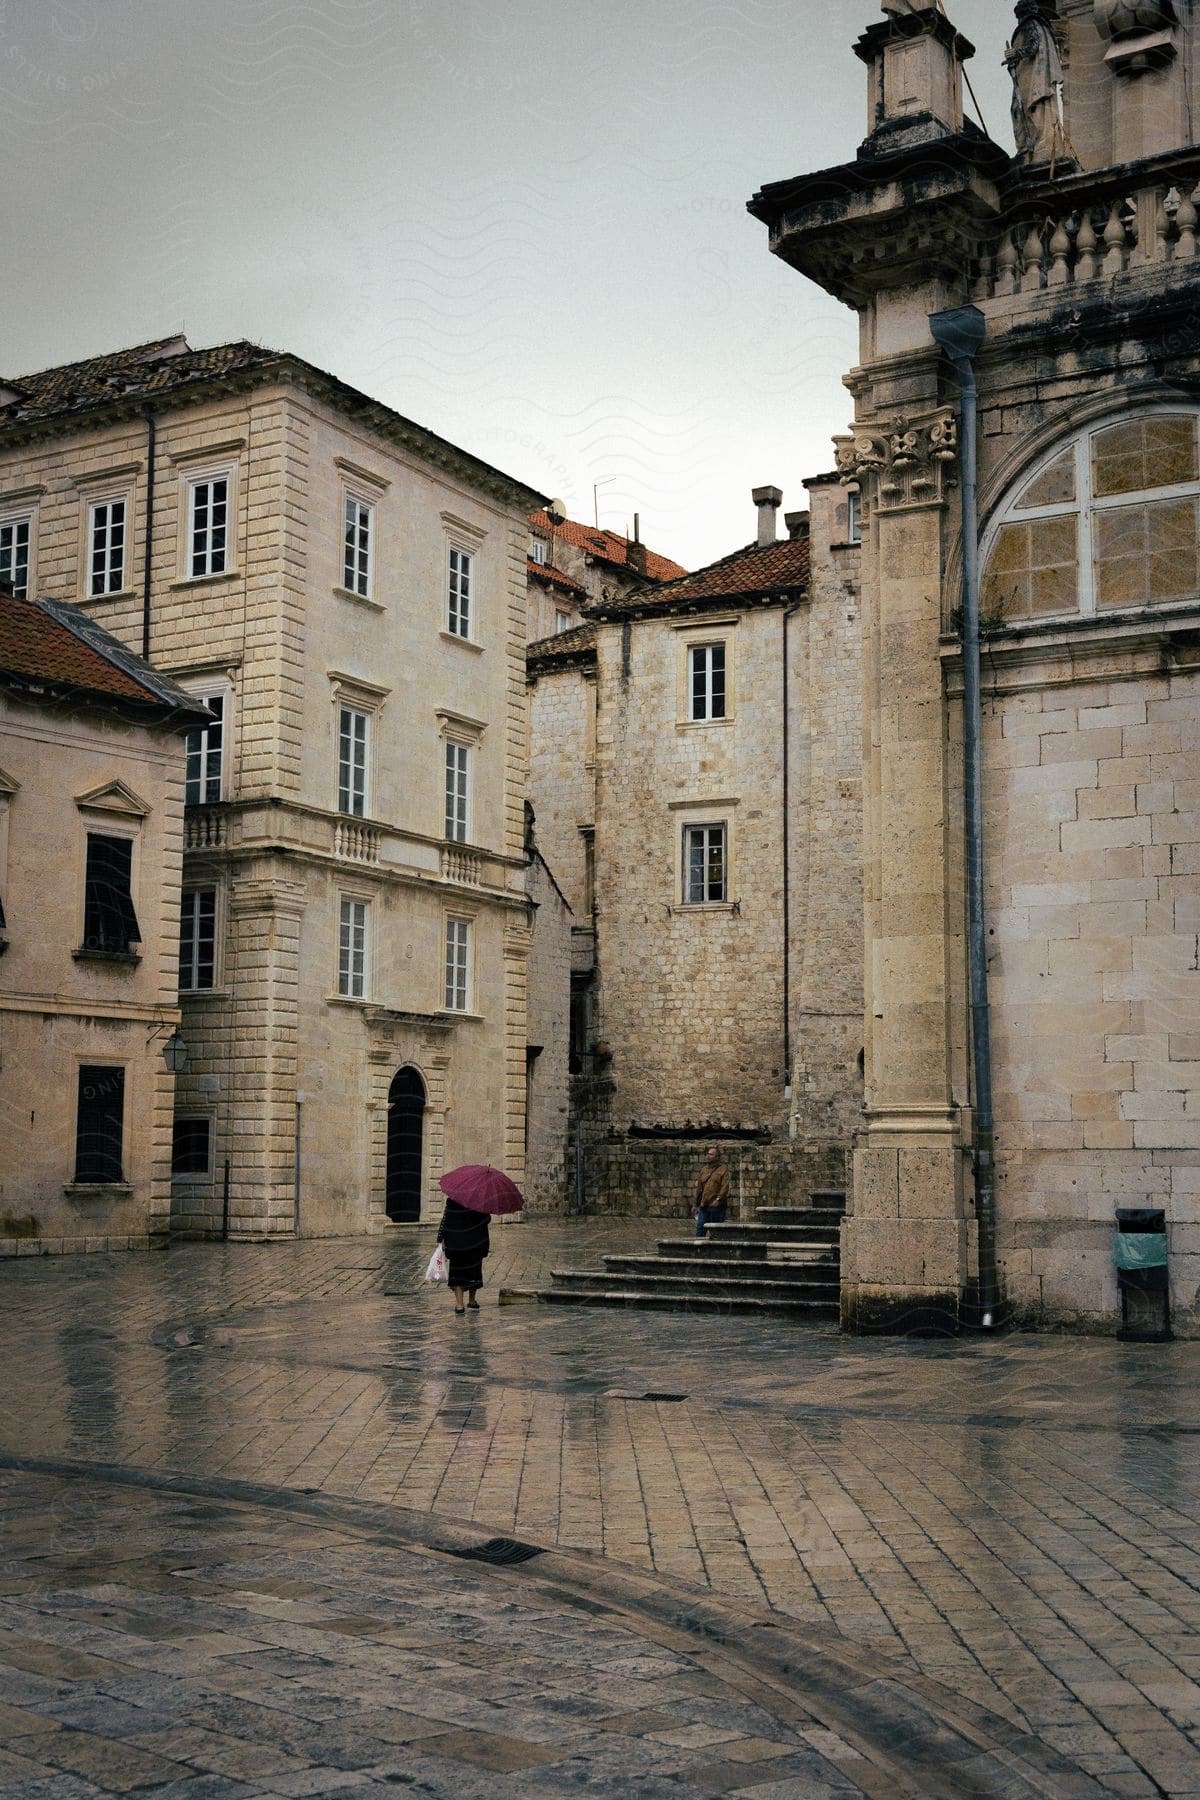 A woman walking with an umbrella near tall stone buildings and stone steps